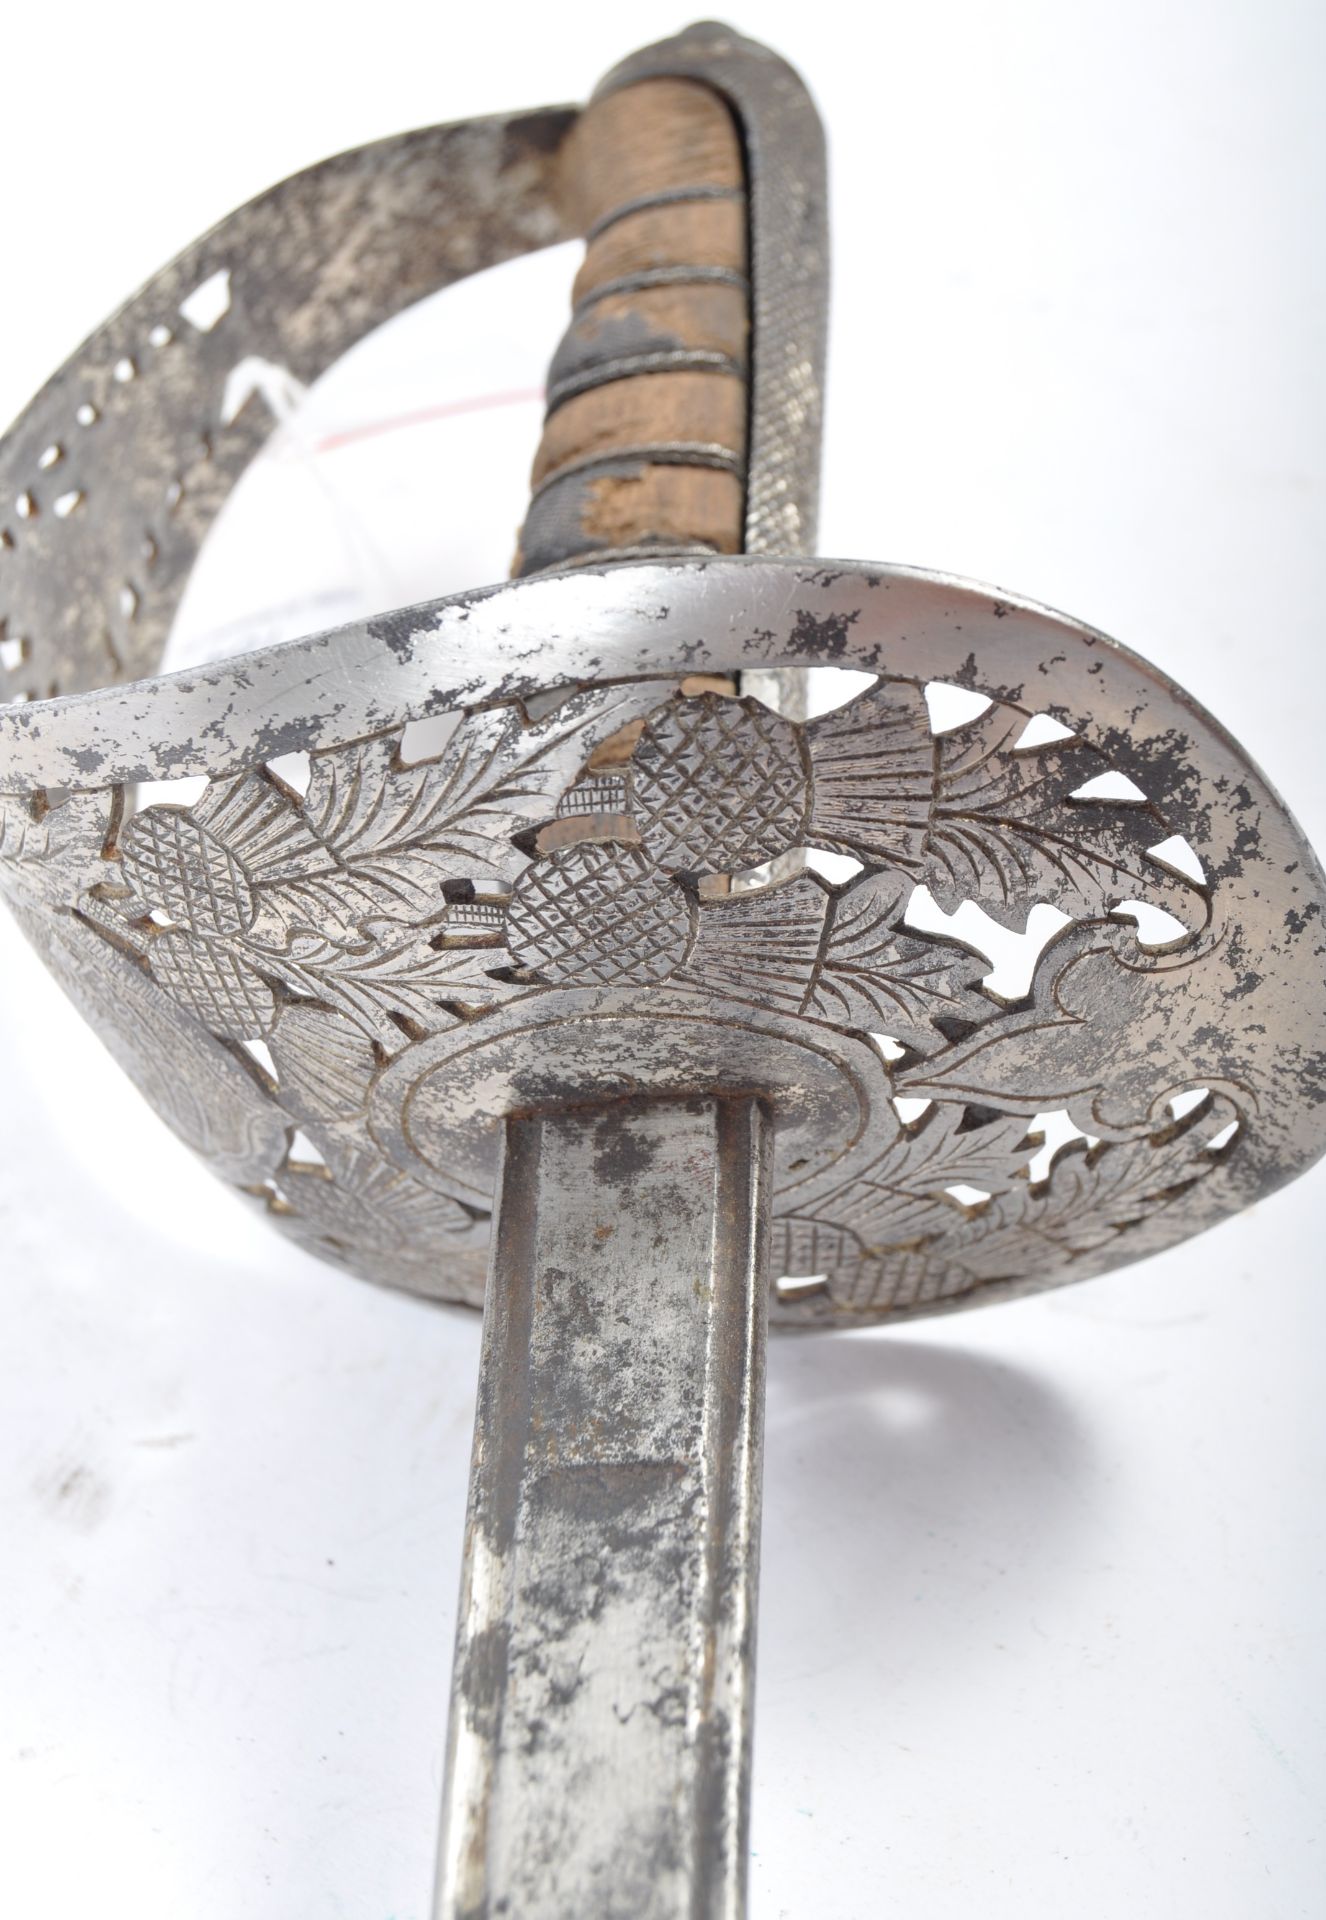 UNUSUAL 19TH CENTURY SCOTTISH OFFICERS SWORD WITH TOLEDO BLADE - Image 3 of 8